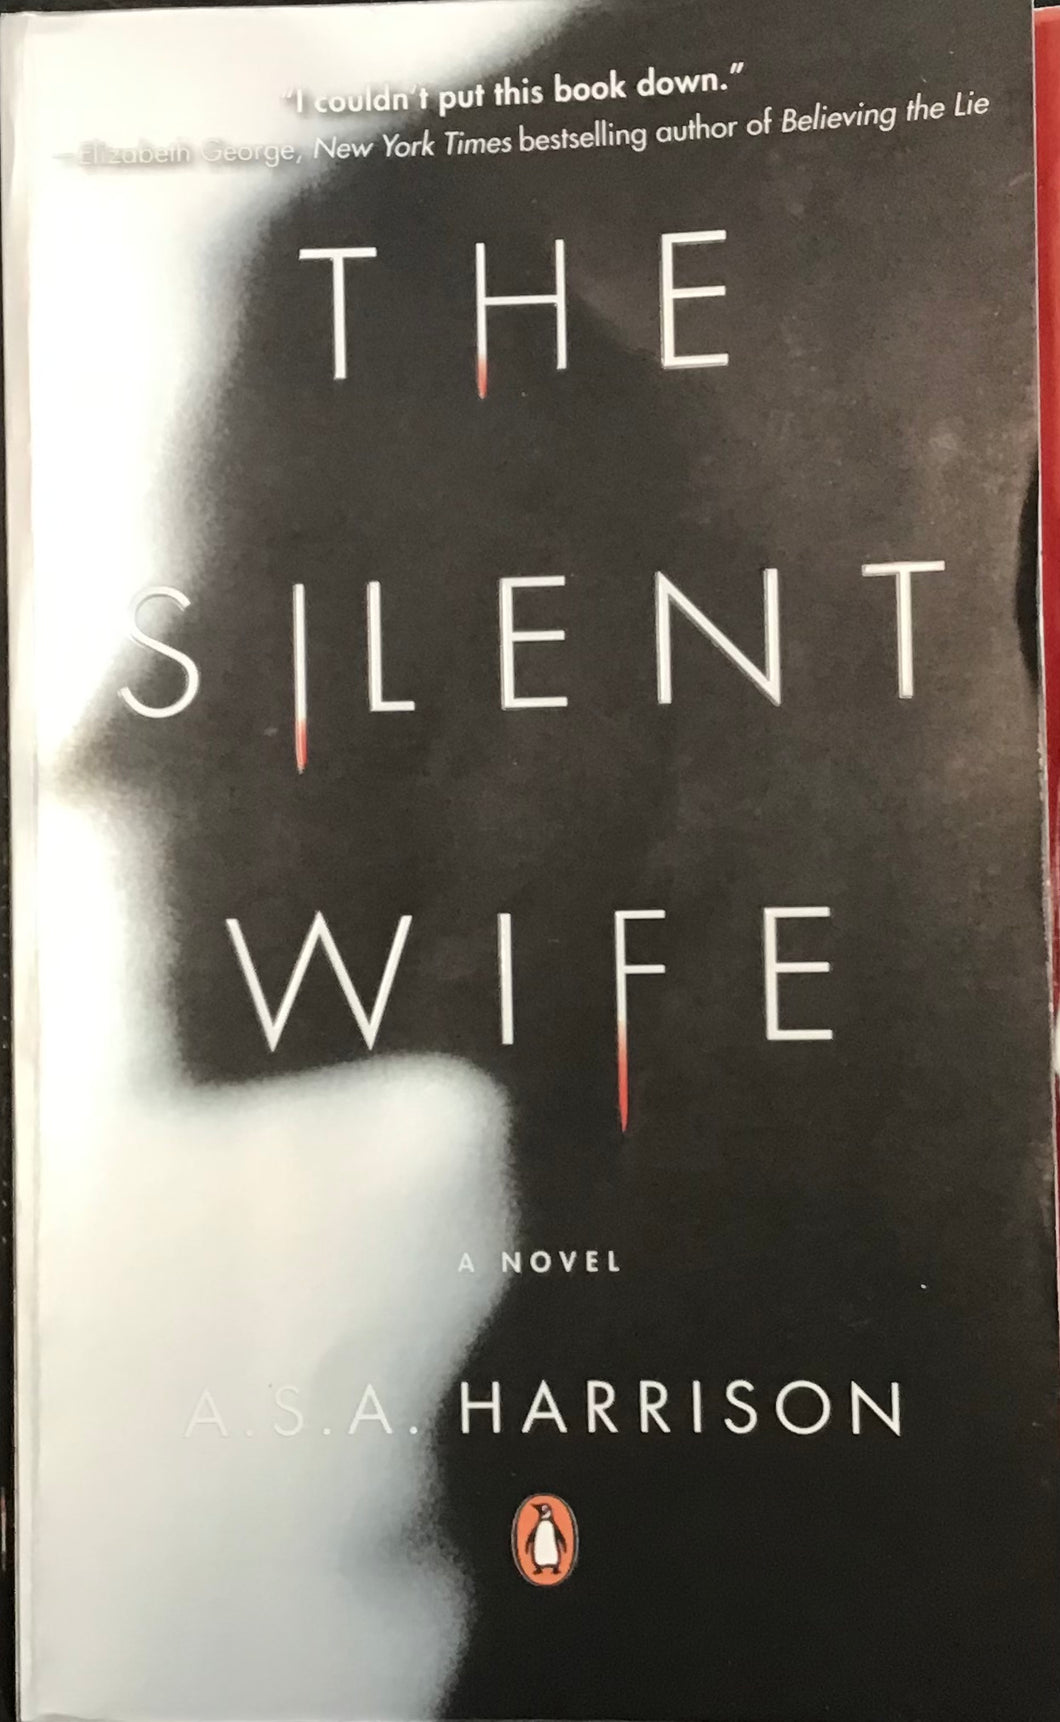 The Silent Wife, A.S.A. Harrison